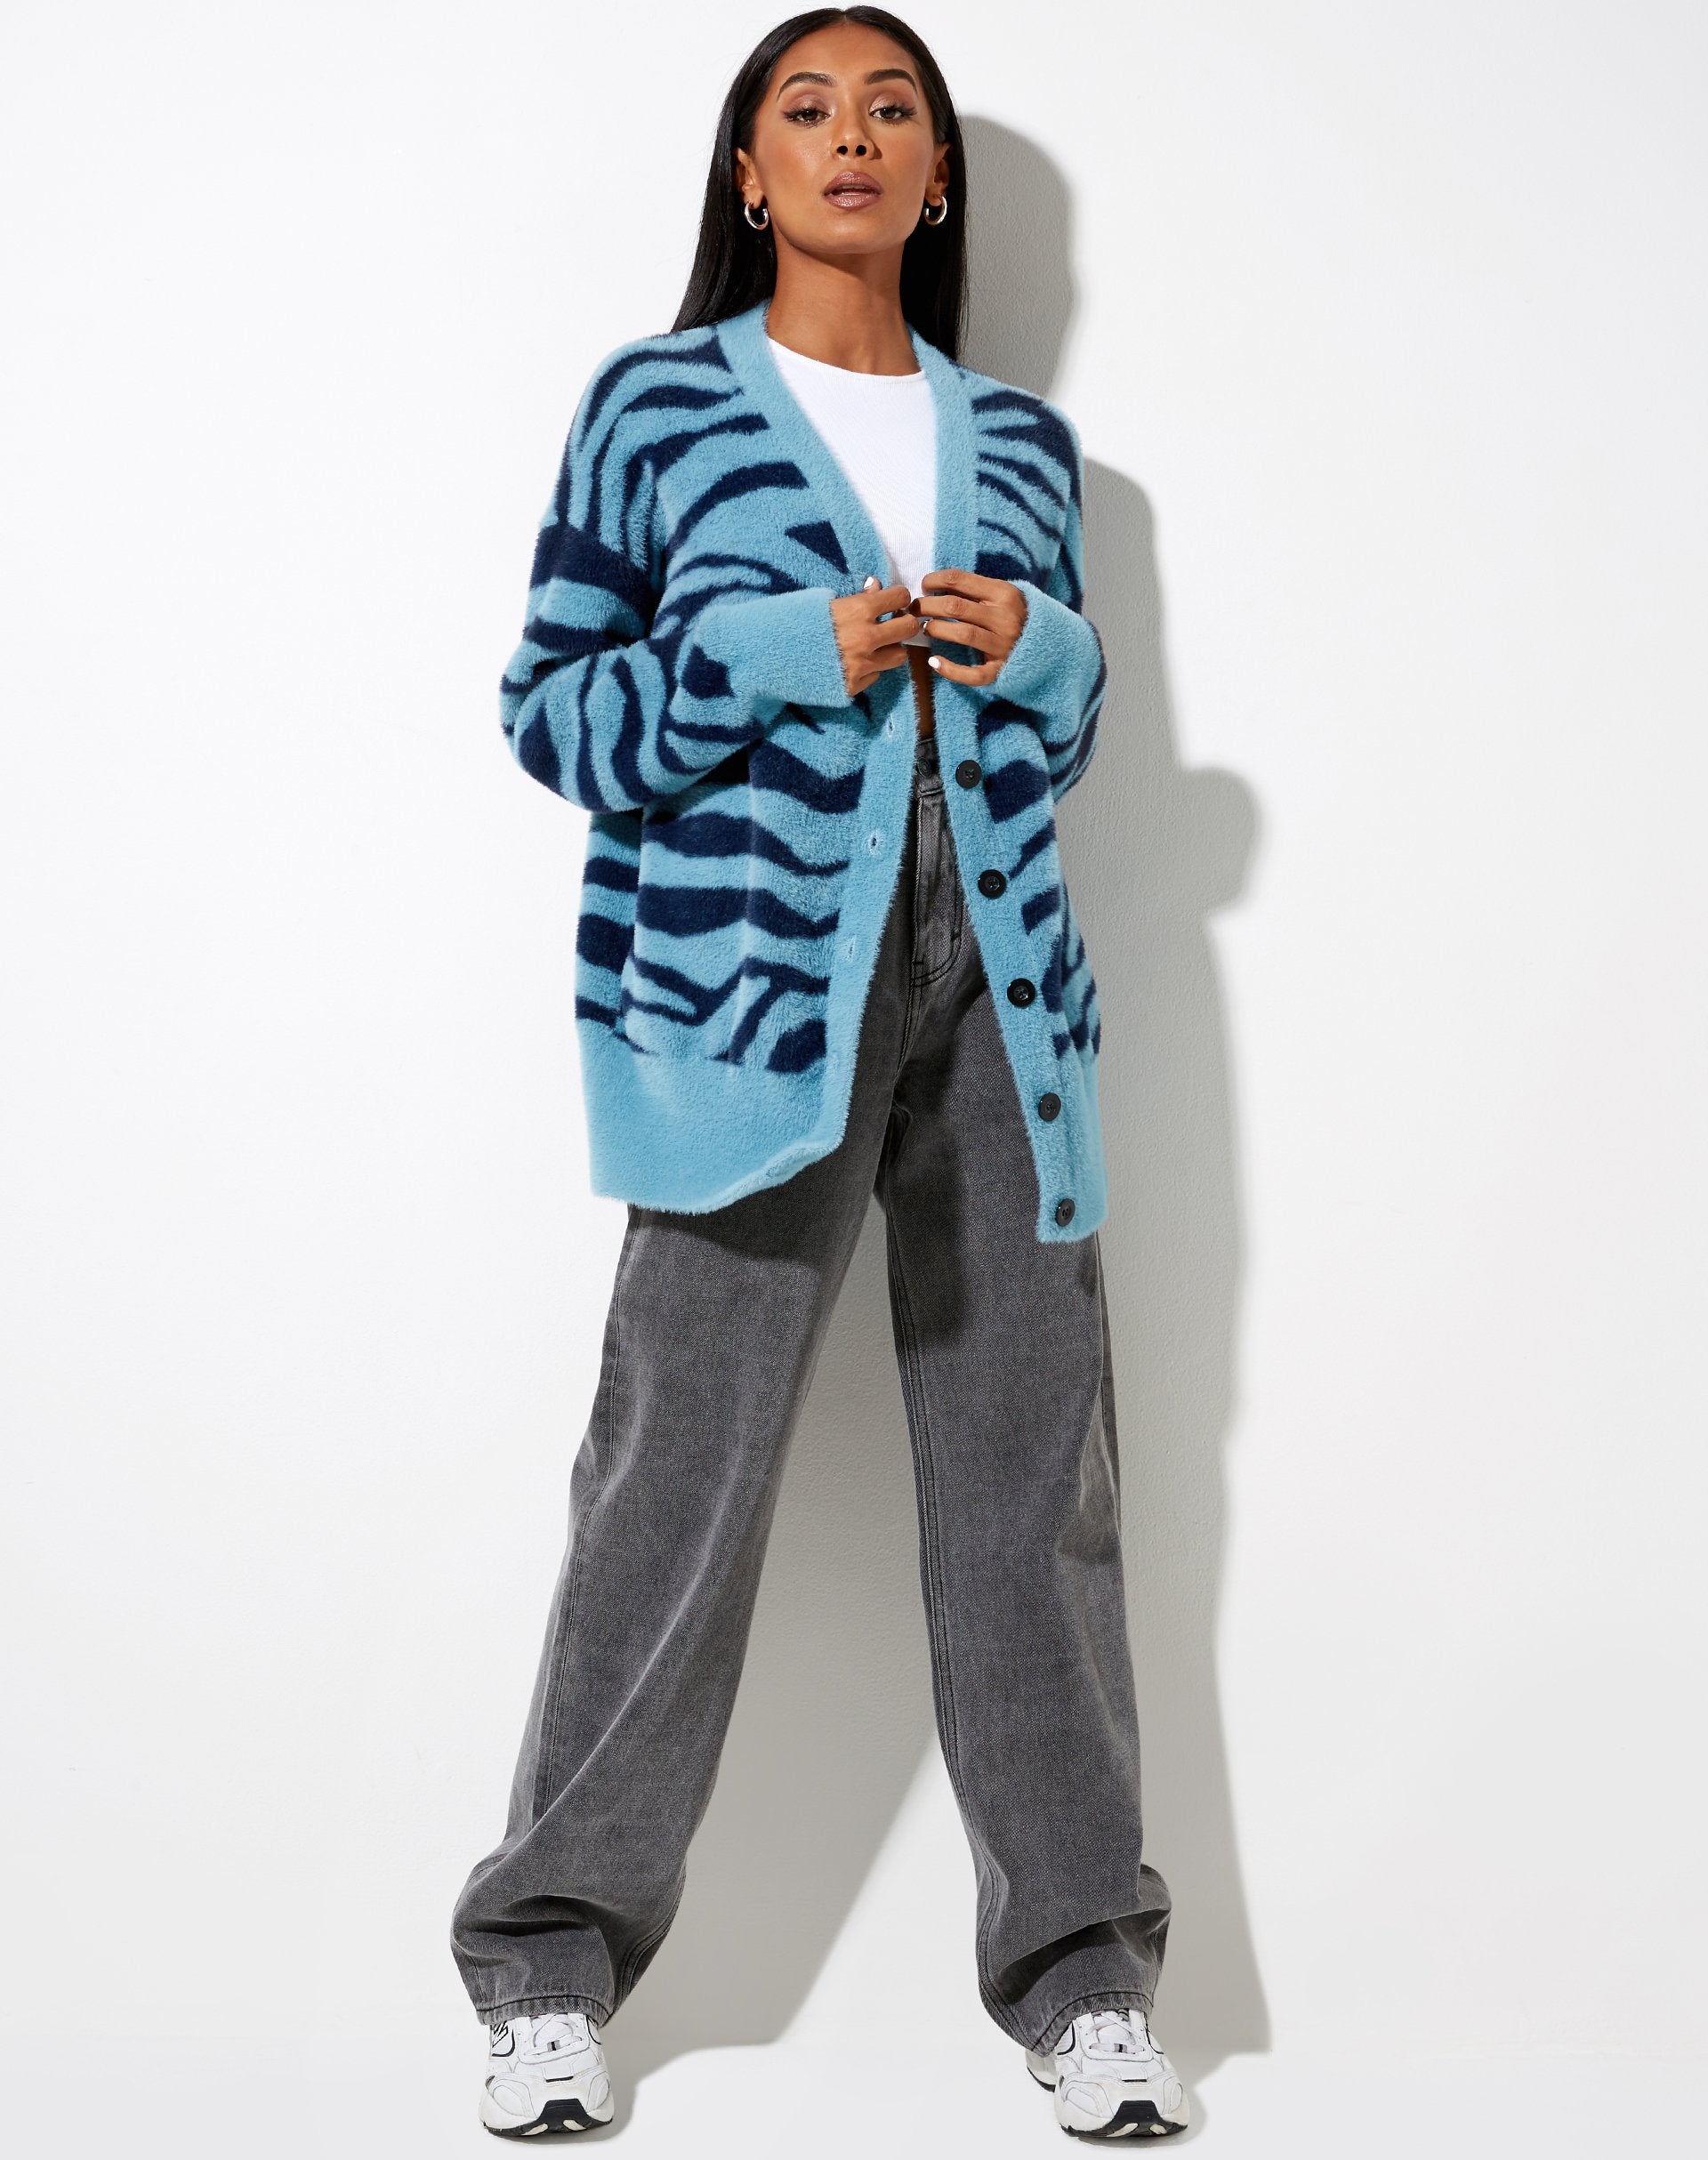 Image of Uriela Cardi in Knit Zebra Blue and Navy